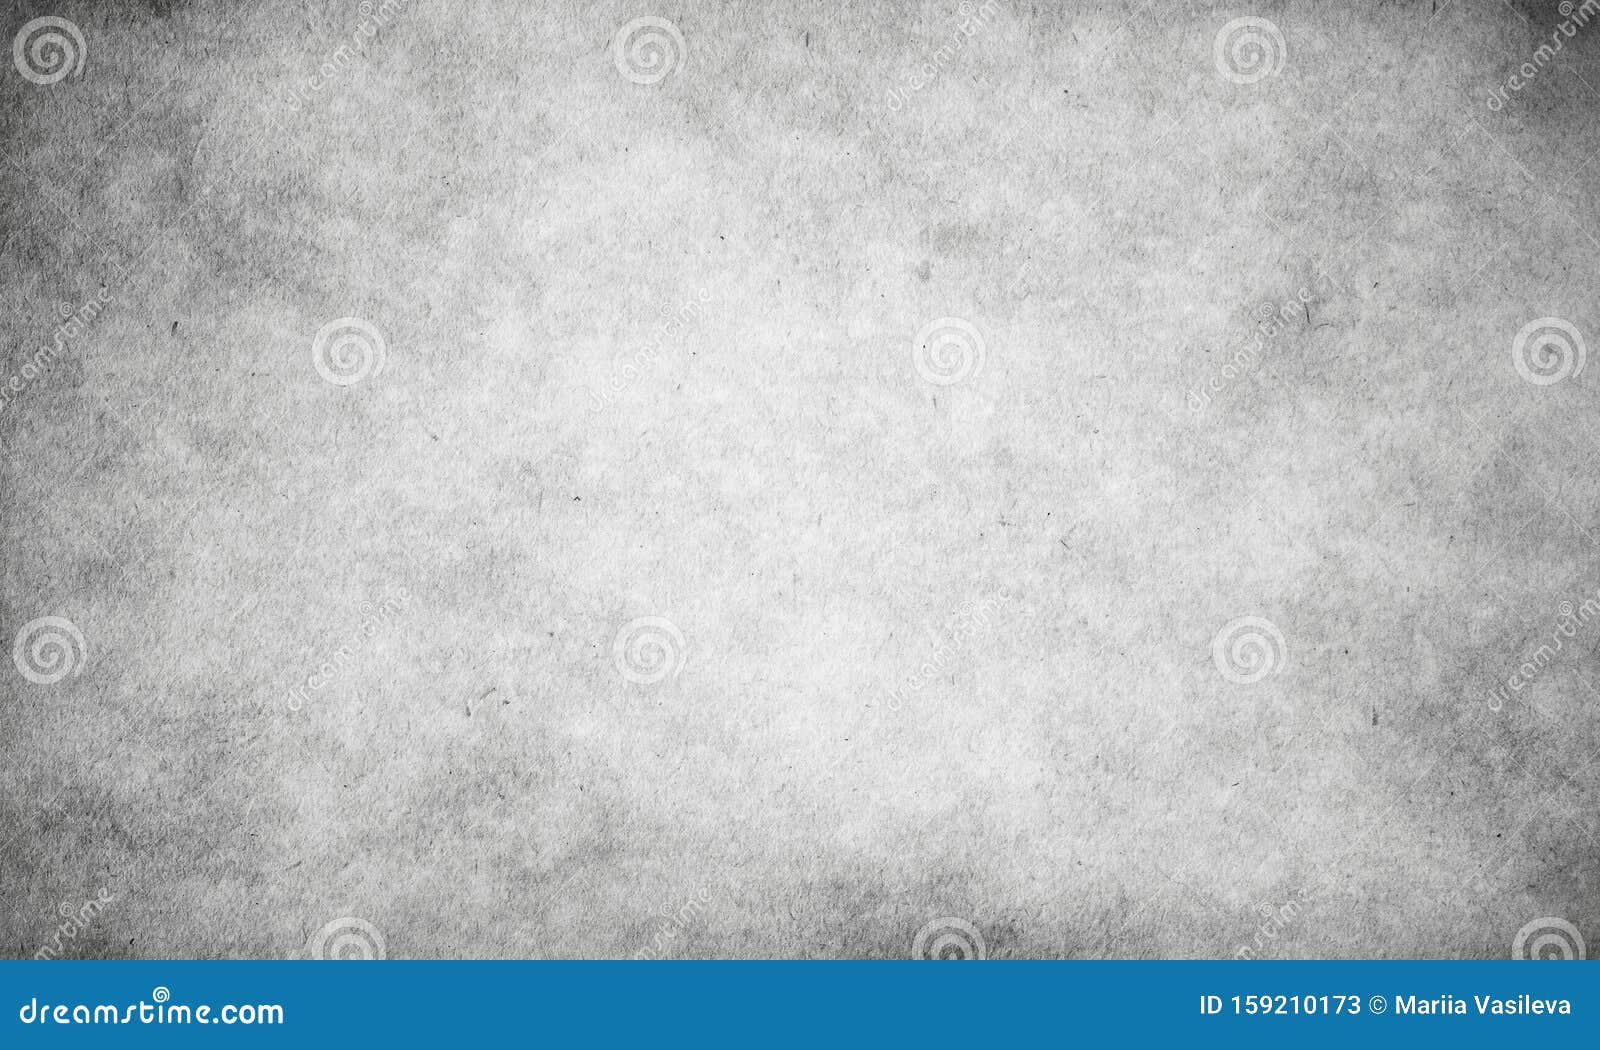 grey grunge background, black and white, vintage, retro, paper texture, stains, stains, rough, rough, paper